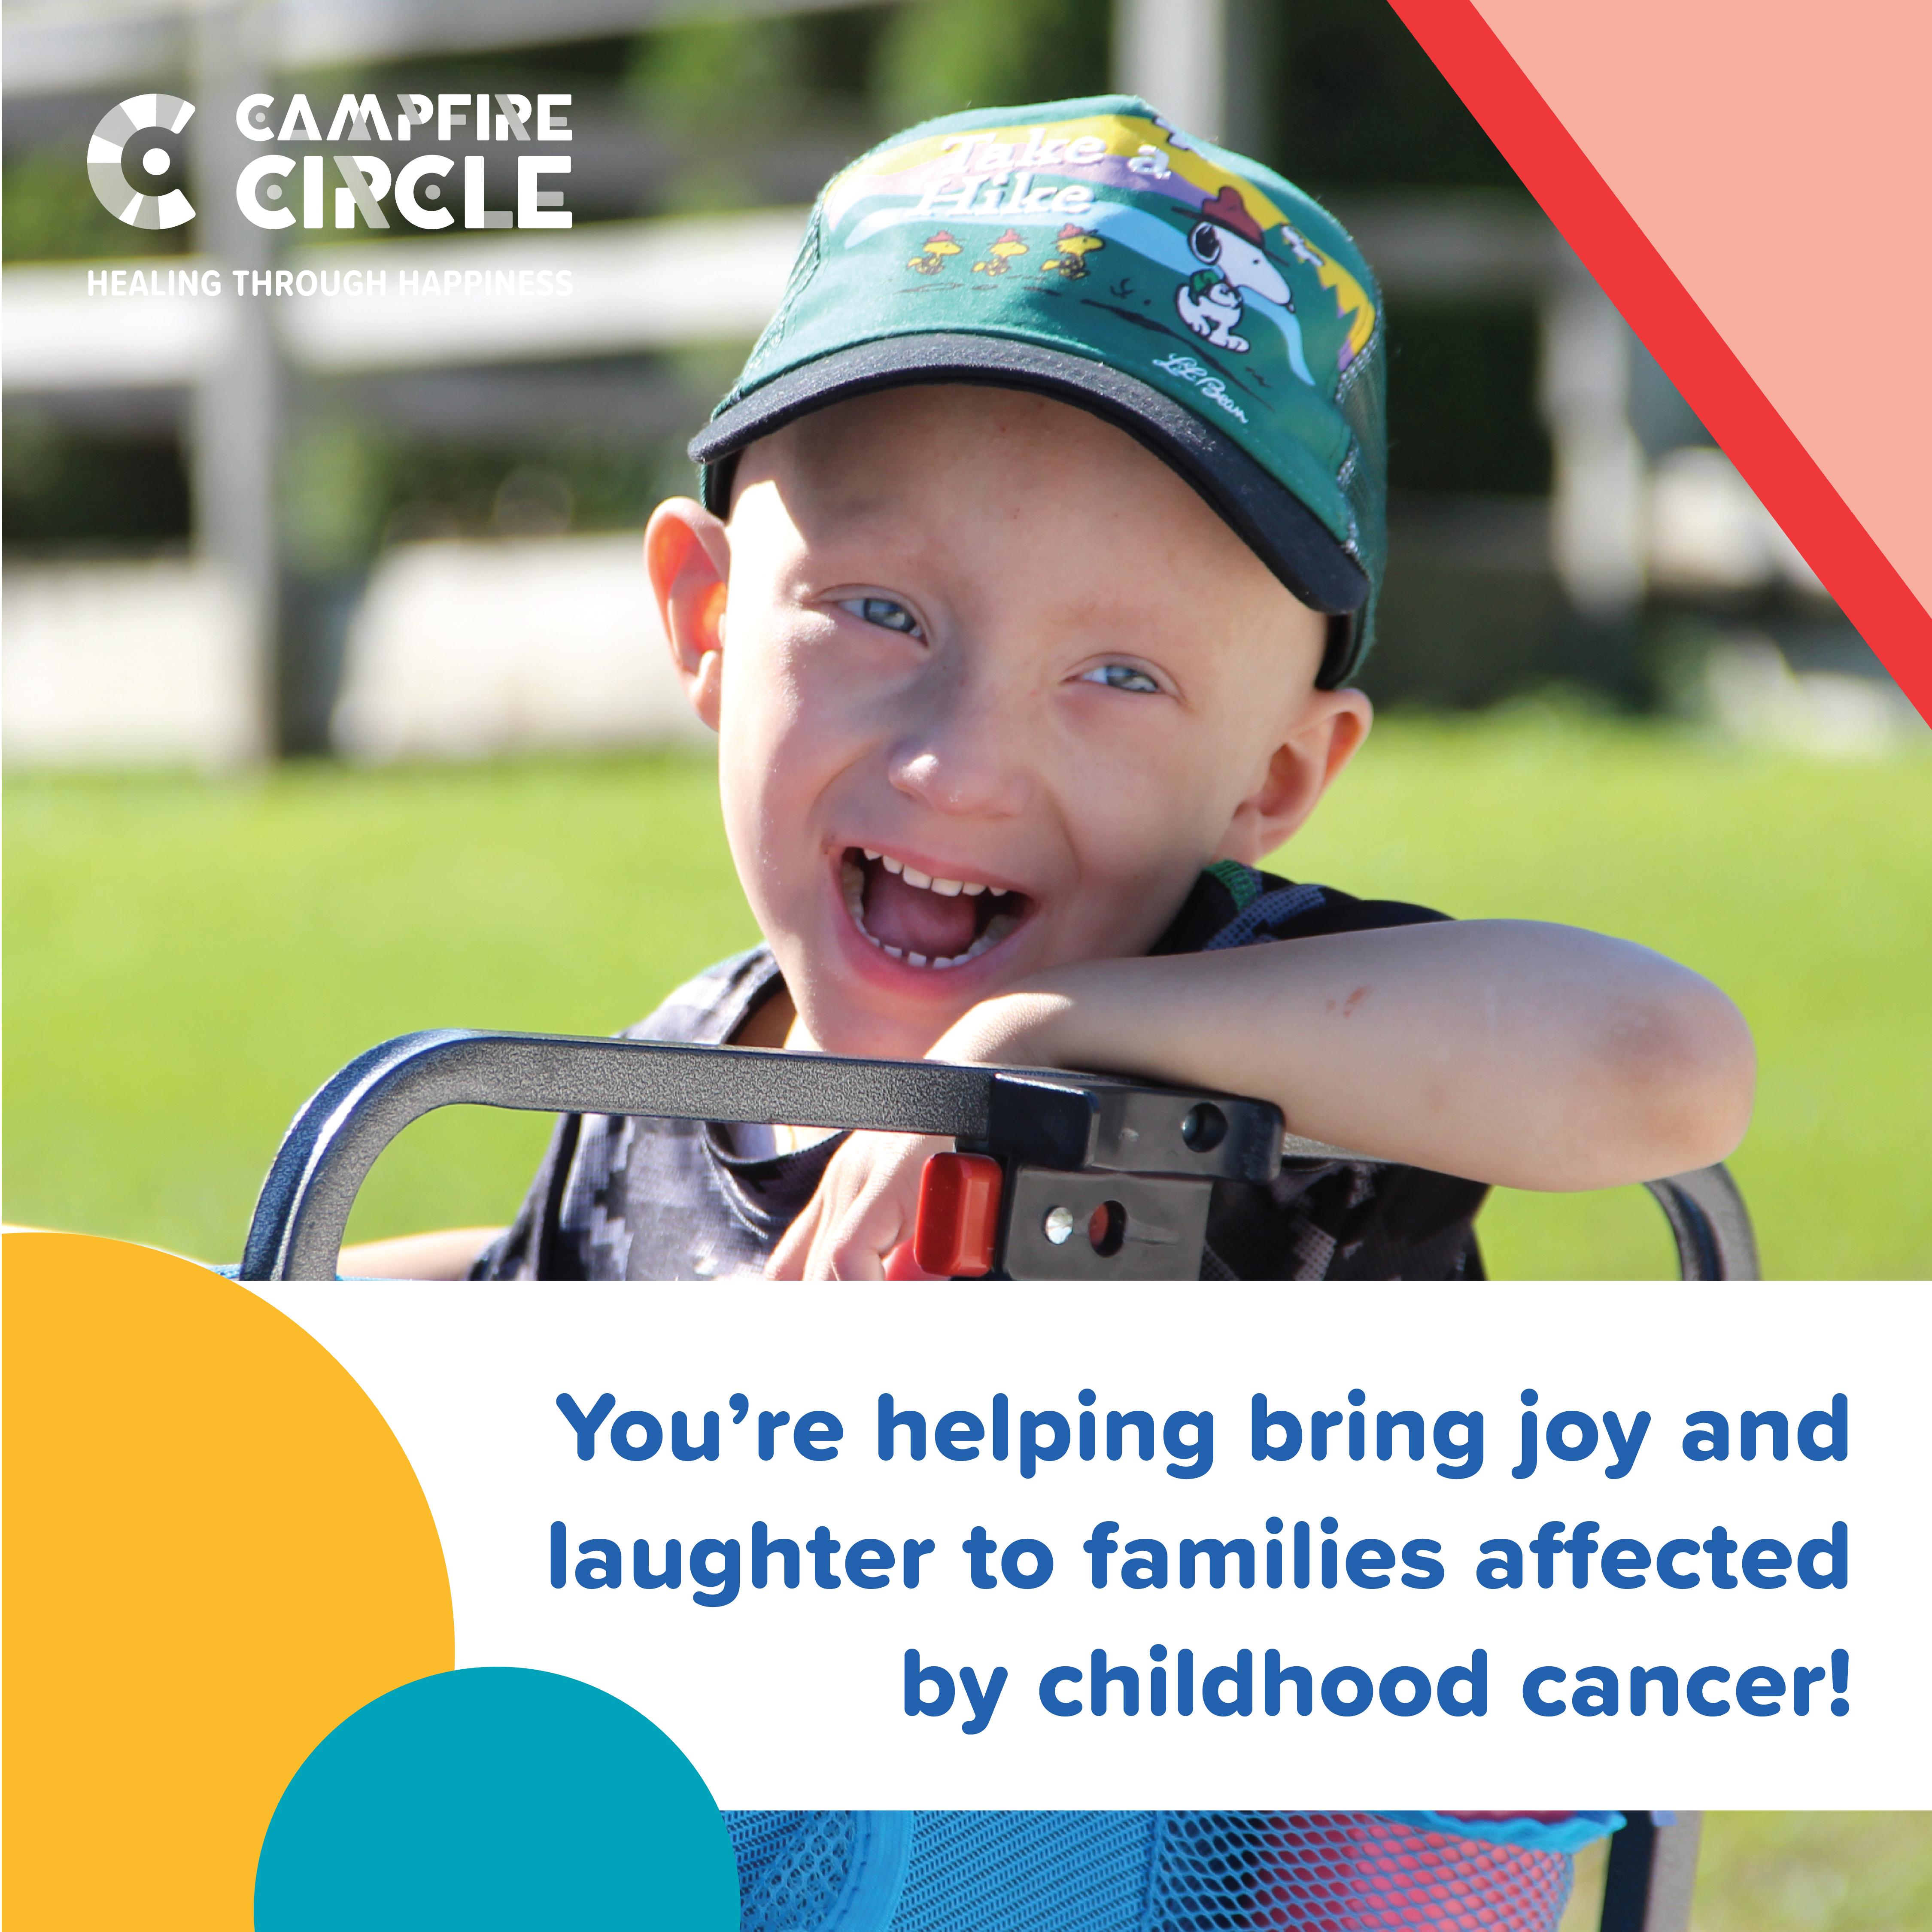 You're helping bring joy and laughter to families affected by childhood cancer!